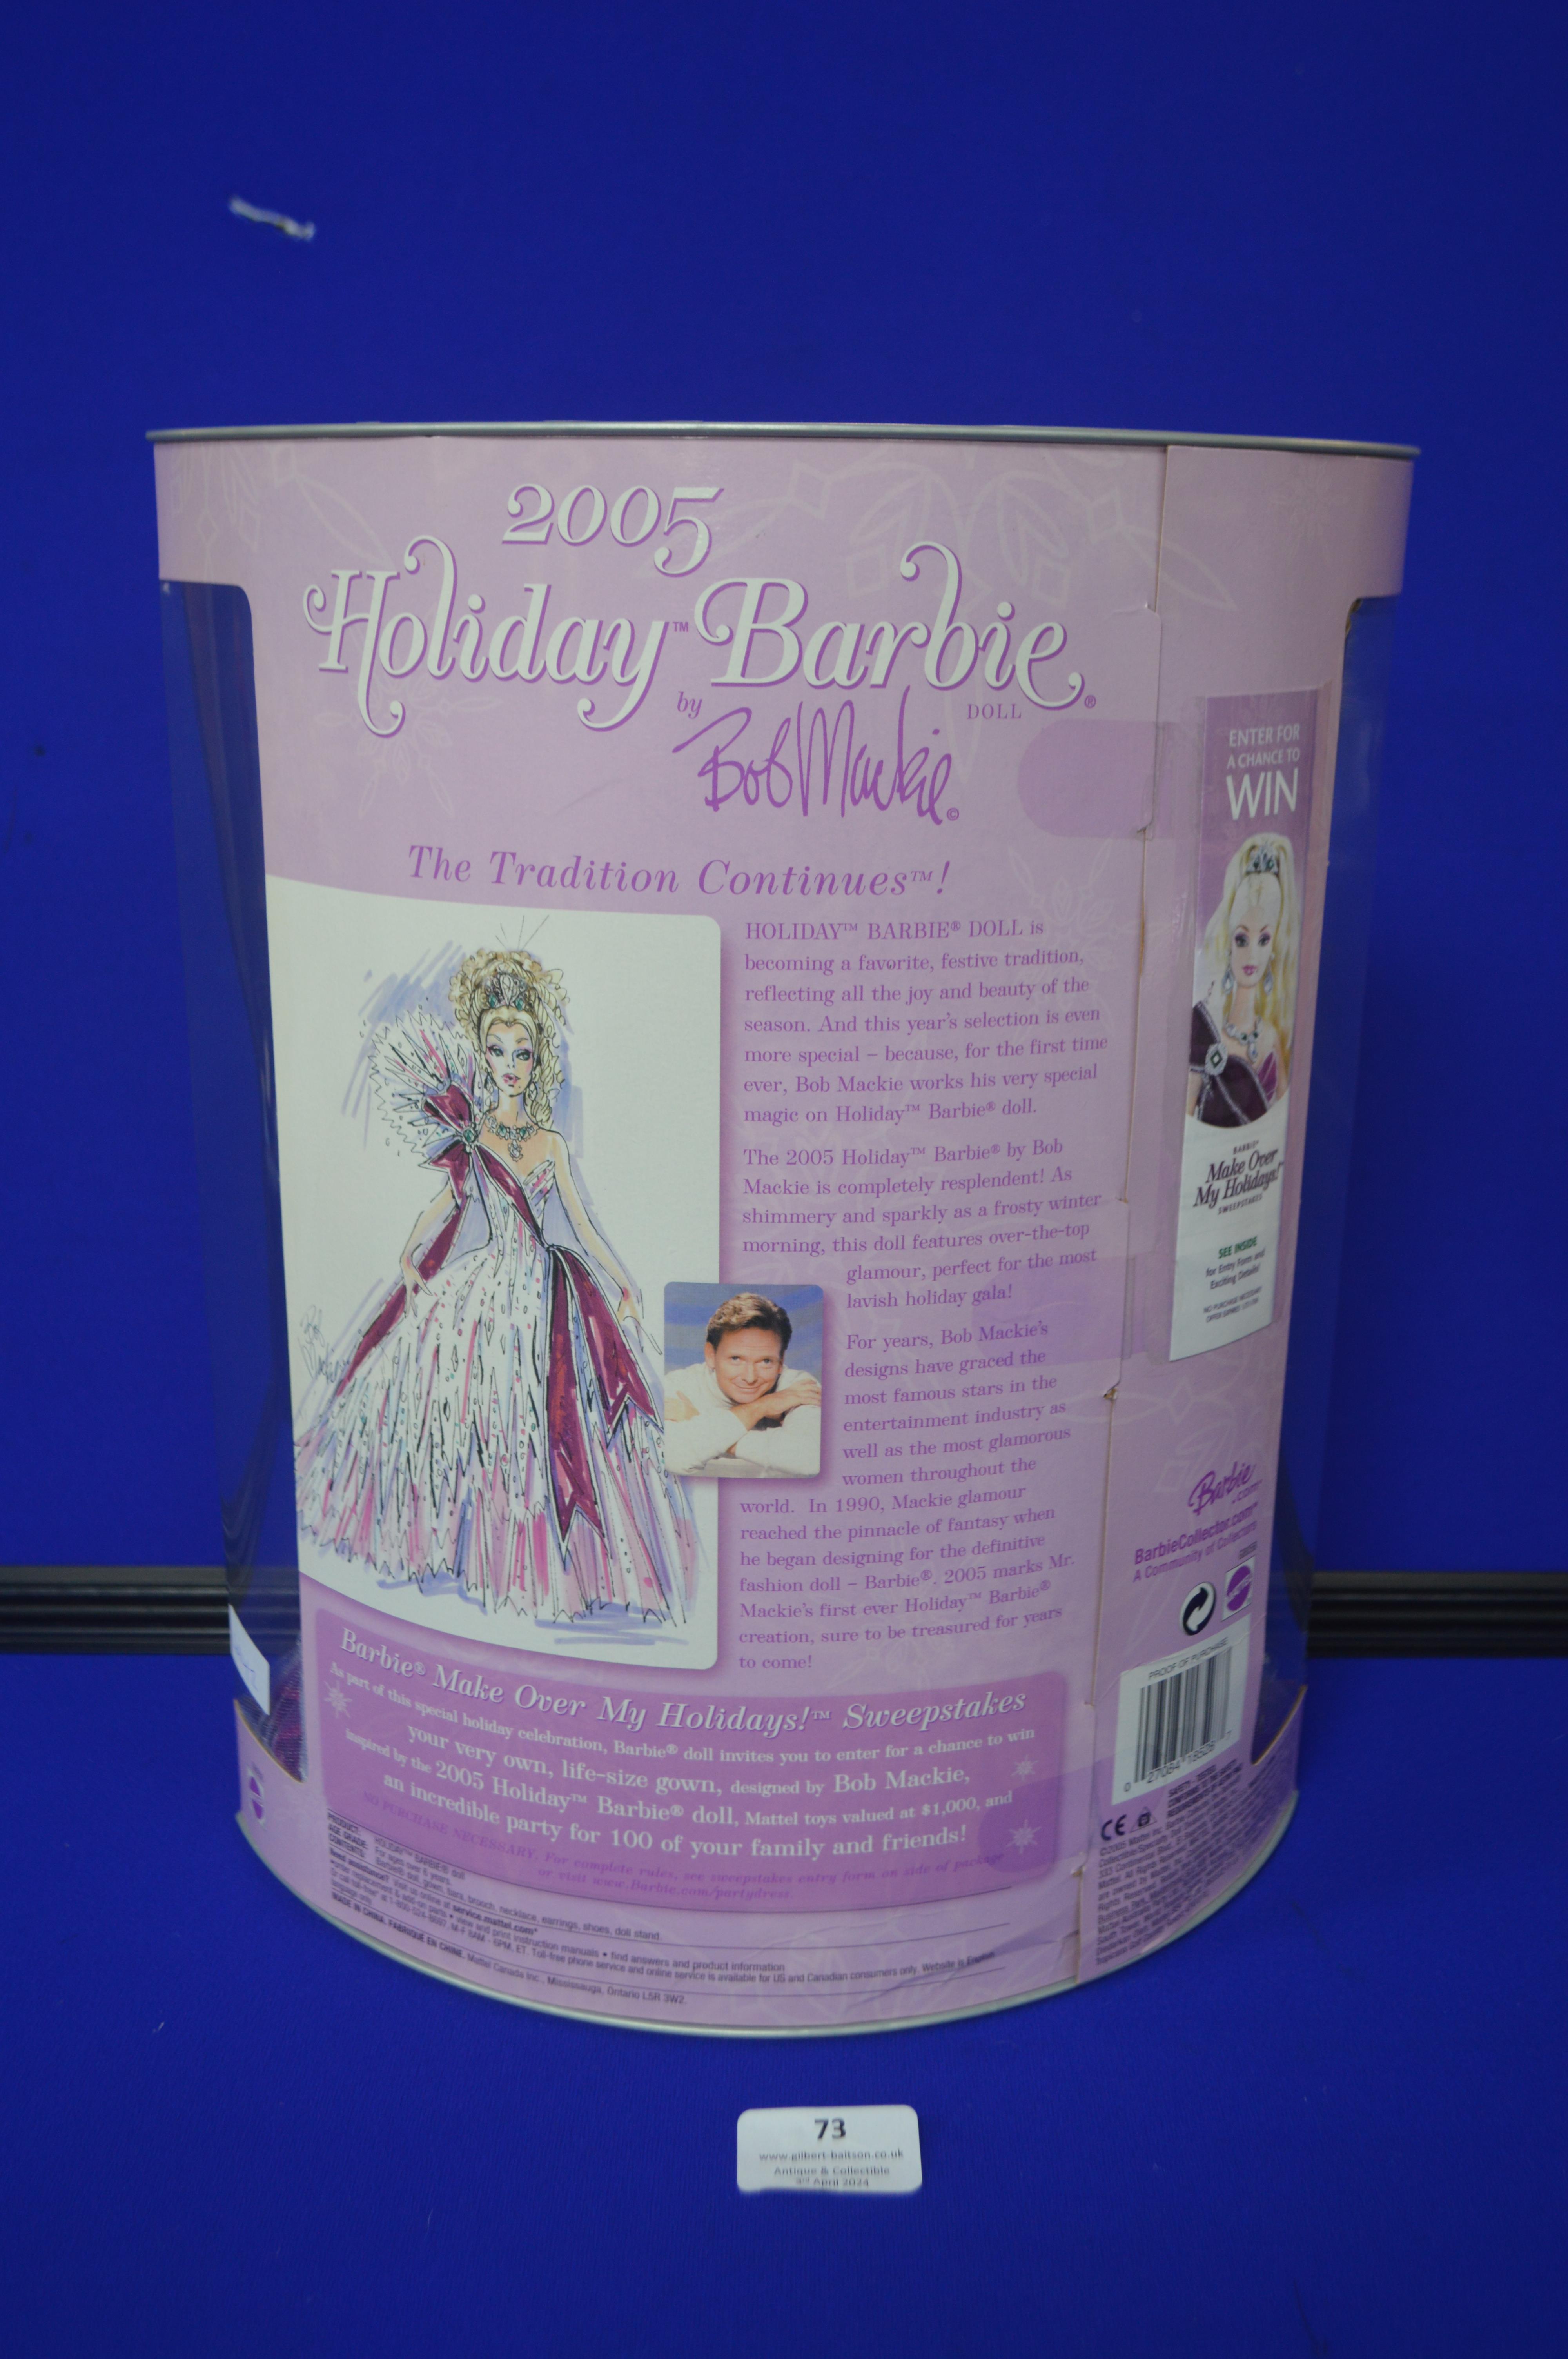 2005 Holiday Barbie Doll by Bob Mackie - Image 2 of 2